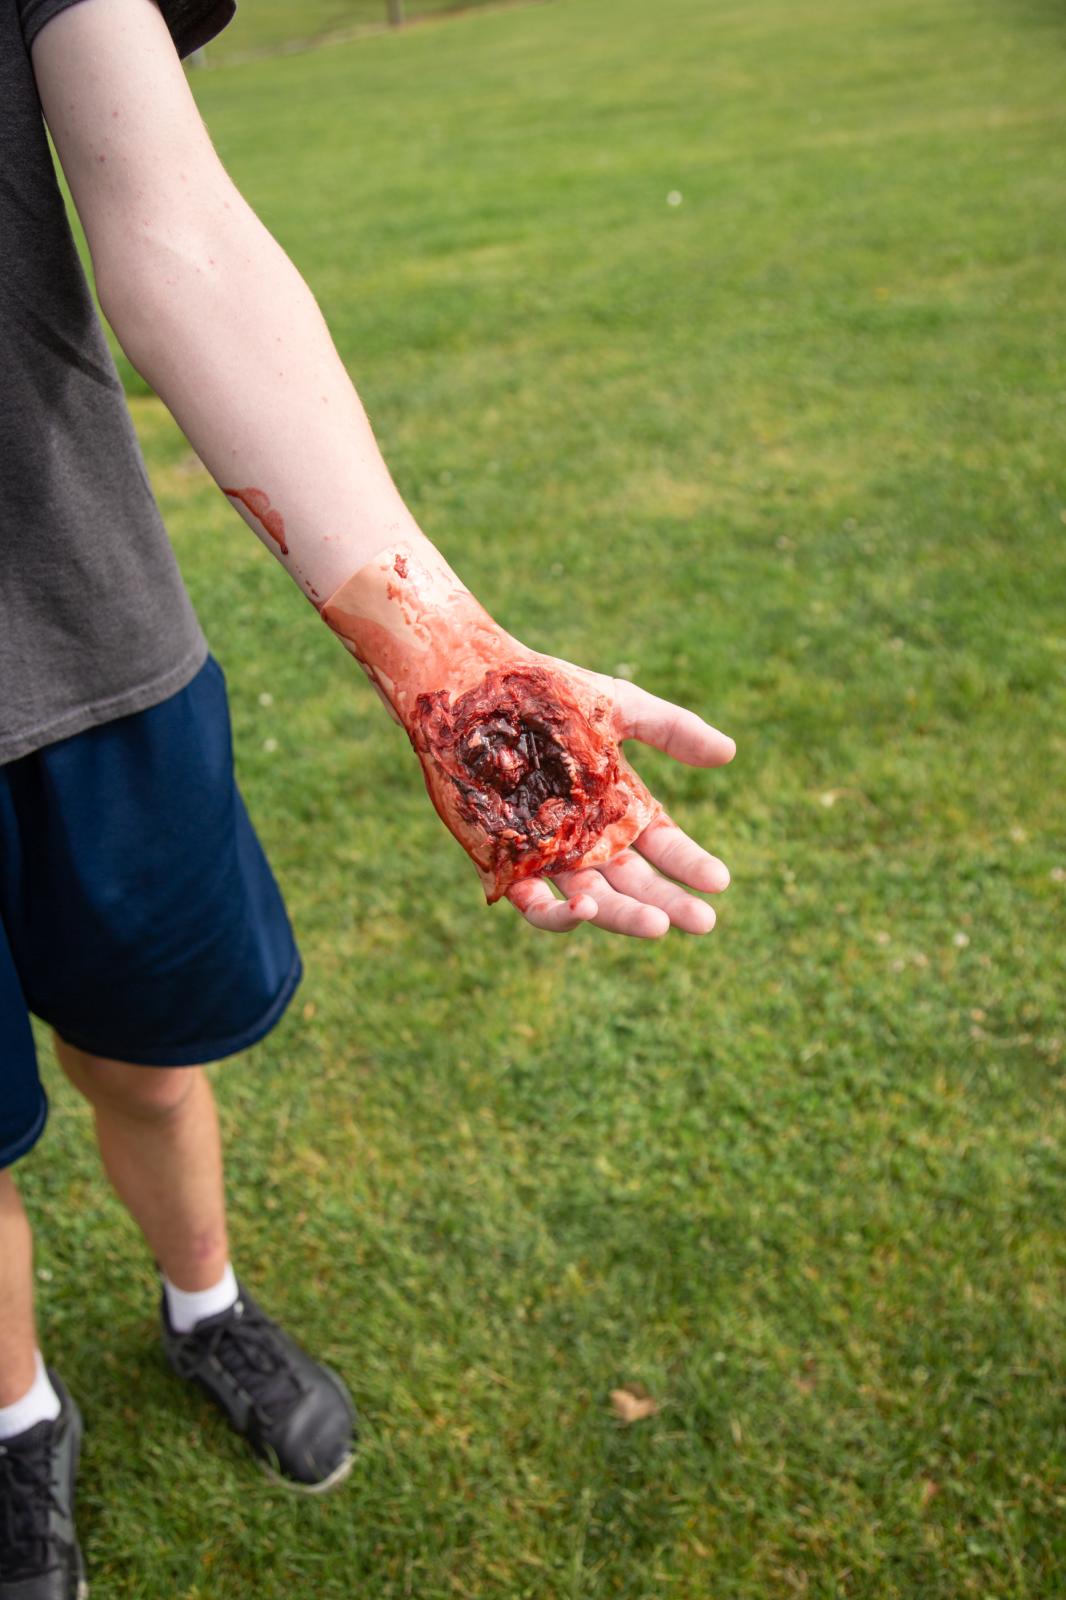 HELL DRILL * Warning* - Cayden Wills, moulage make-up gunshot wound to the hand.